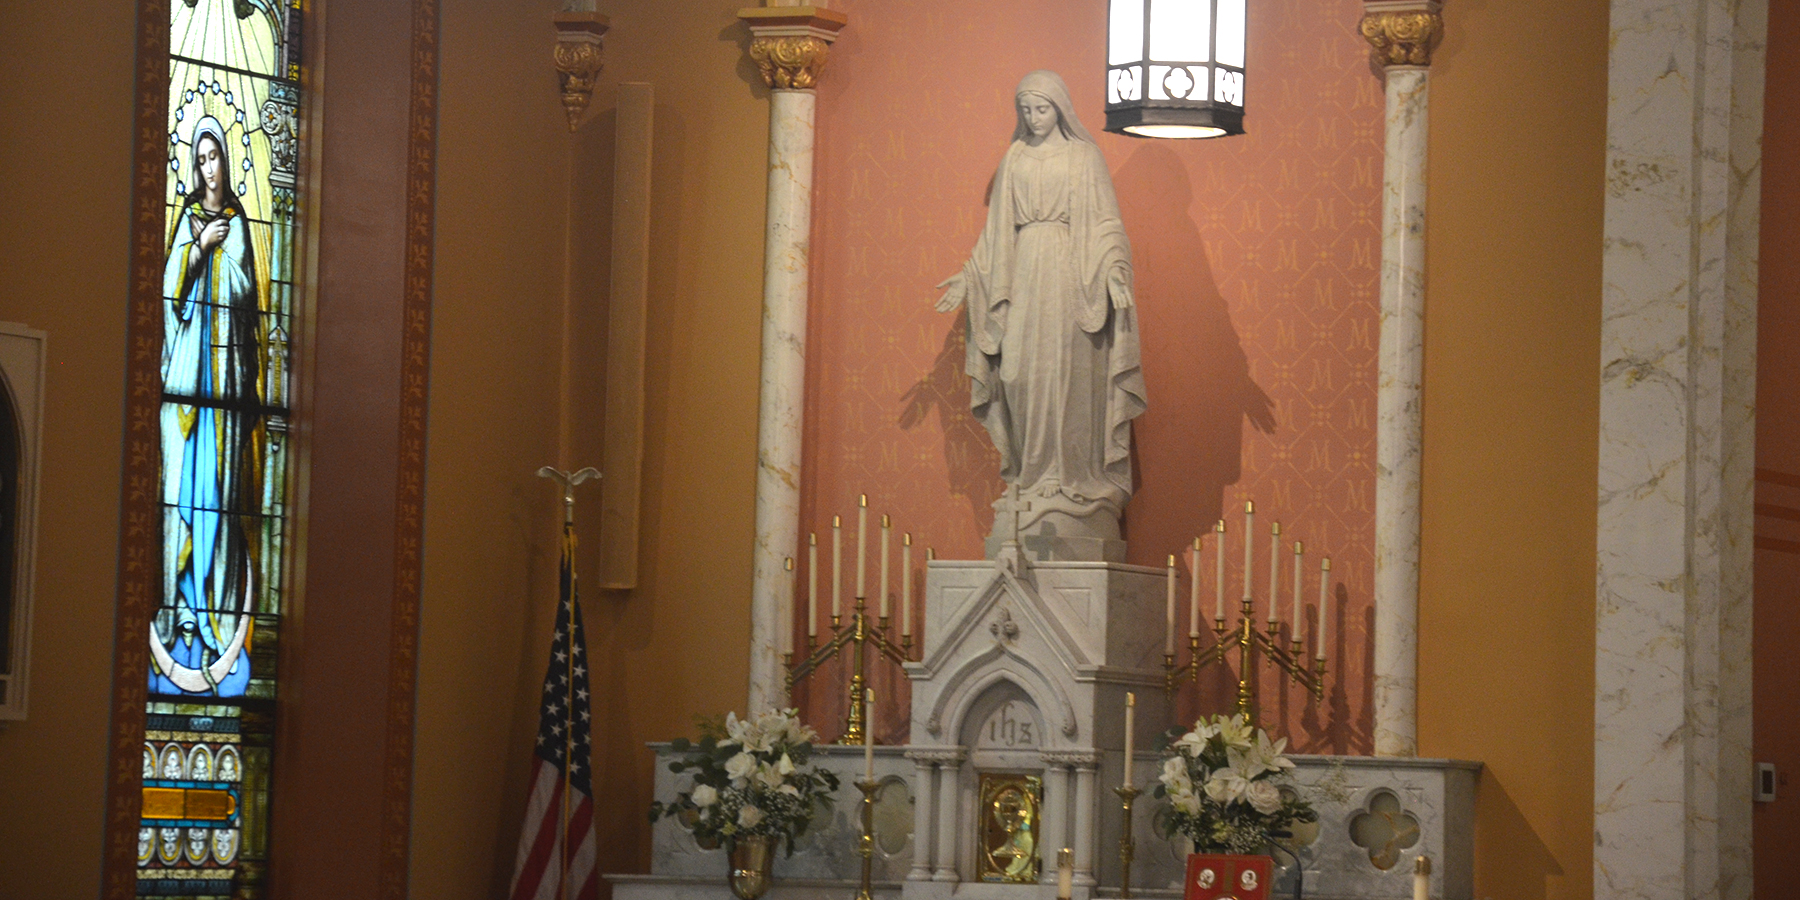 The side altar of the Blessed Virgin Mary